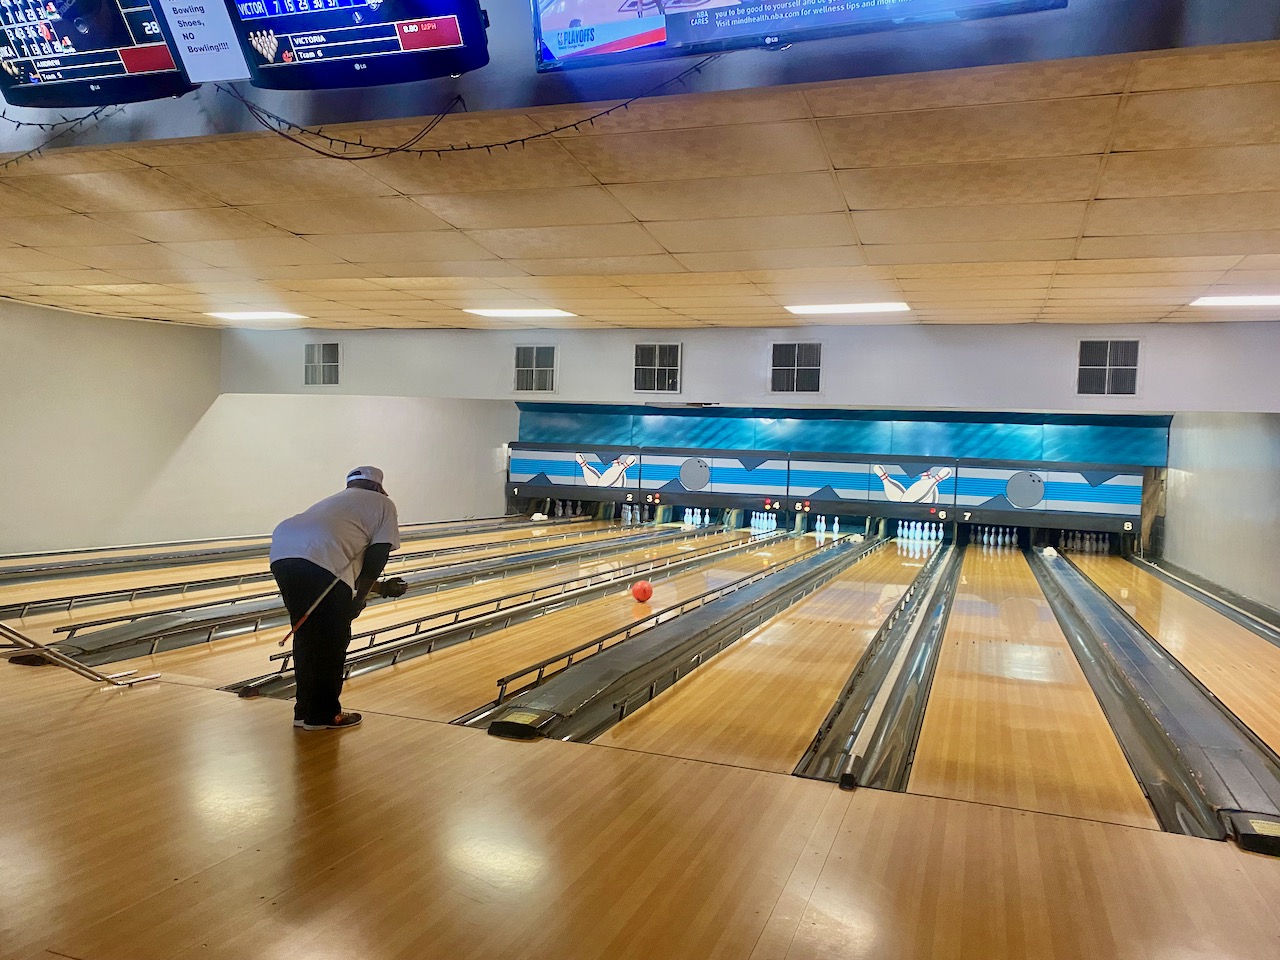 Cane tucked under his right arm, Andrew leans forward after his left-handed release. The ball speeds down the lane toward 3 standing pins.